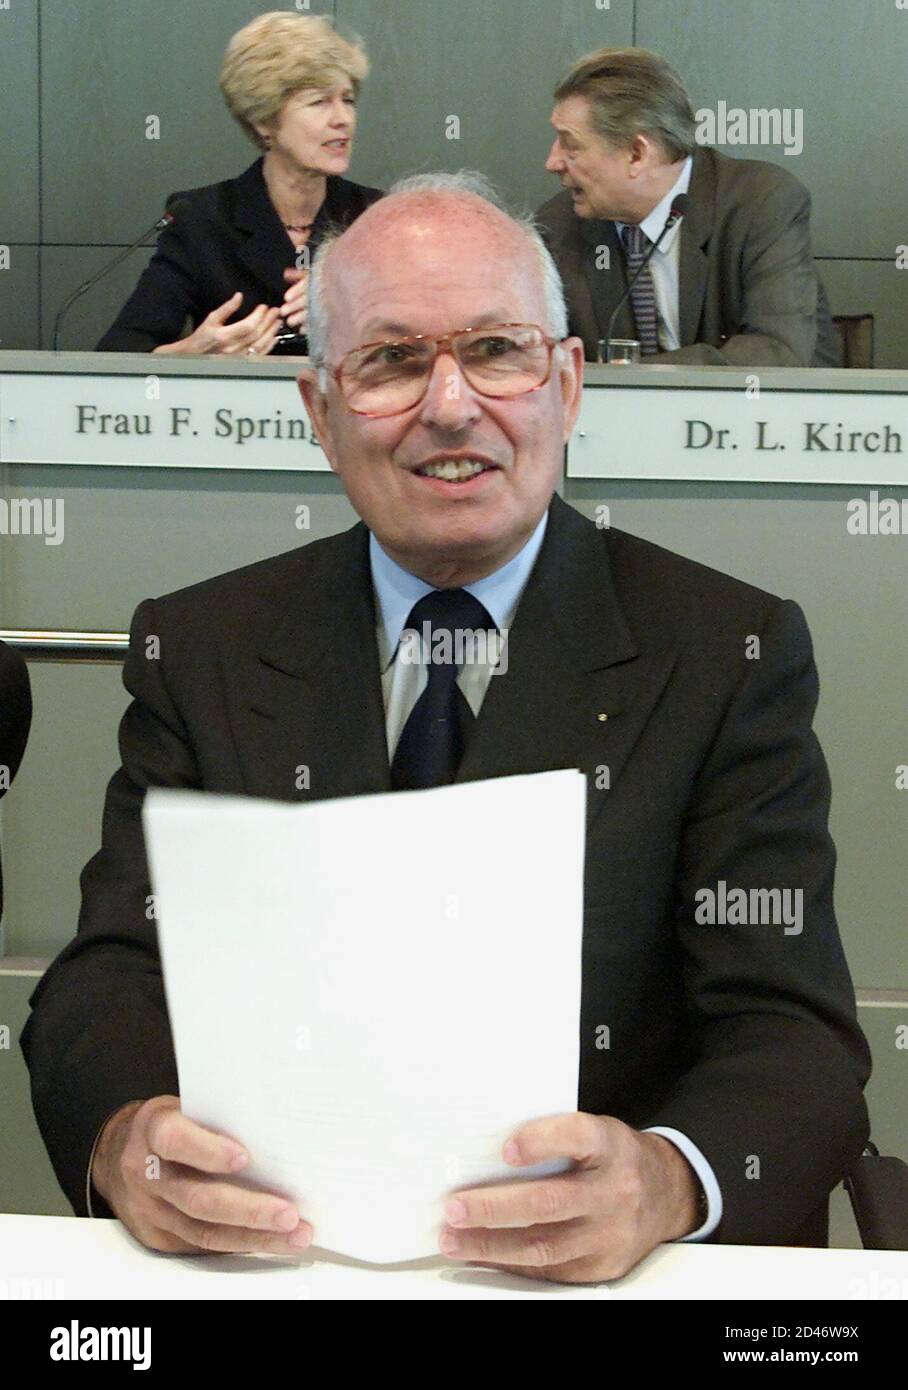 SUPERVISORY BOARD CHAIRMAN SERVATIUS IN FRONT OFGERMAN MEDIA MOGUL LEO KIRCH AND FRIEDE SPRINGER AT ANNUAL MEETING OF SPRINGER VERLAG AG IN BERLIN.   Chairman of the supervisory board Bernhard Servatius smiles as he sits in front of German media mogul Leo Kirch (R) and Friede Springer (L) before a annual shareholder meeting of the Springer Verlag AG publishing group in Berlin June 27, 2001. Kirch's company owns 40.5 percent of the German publishing empire. Stock Photo